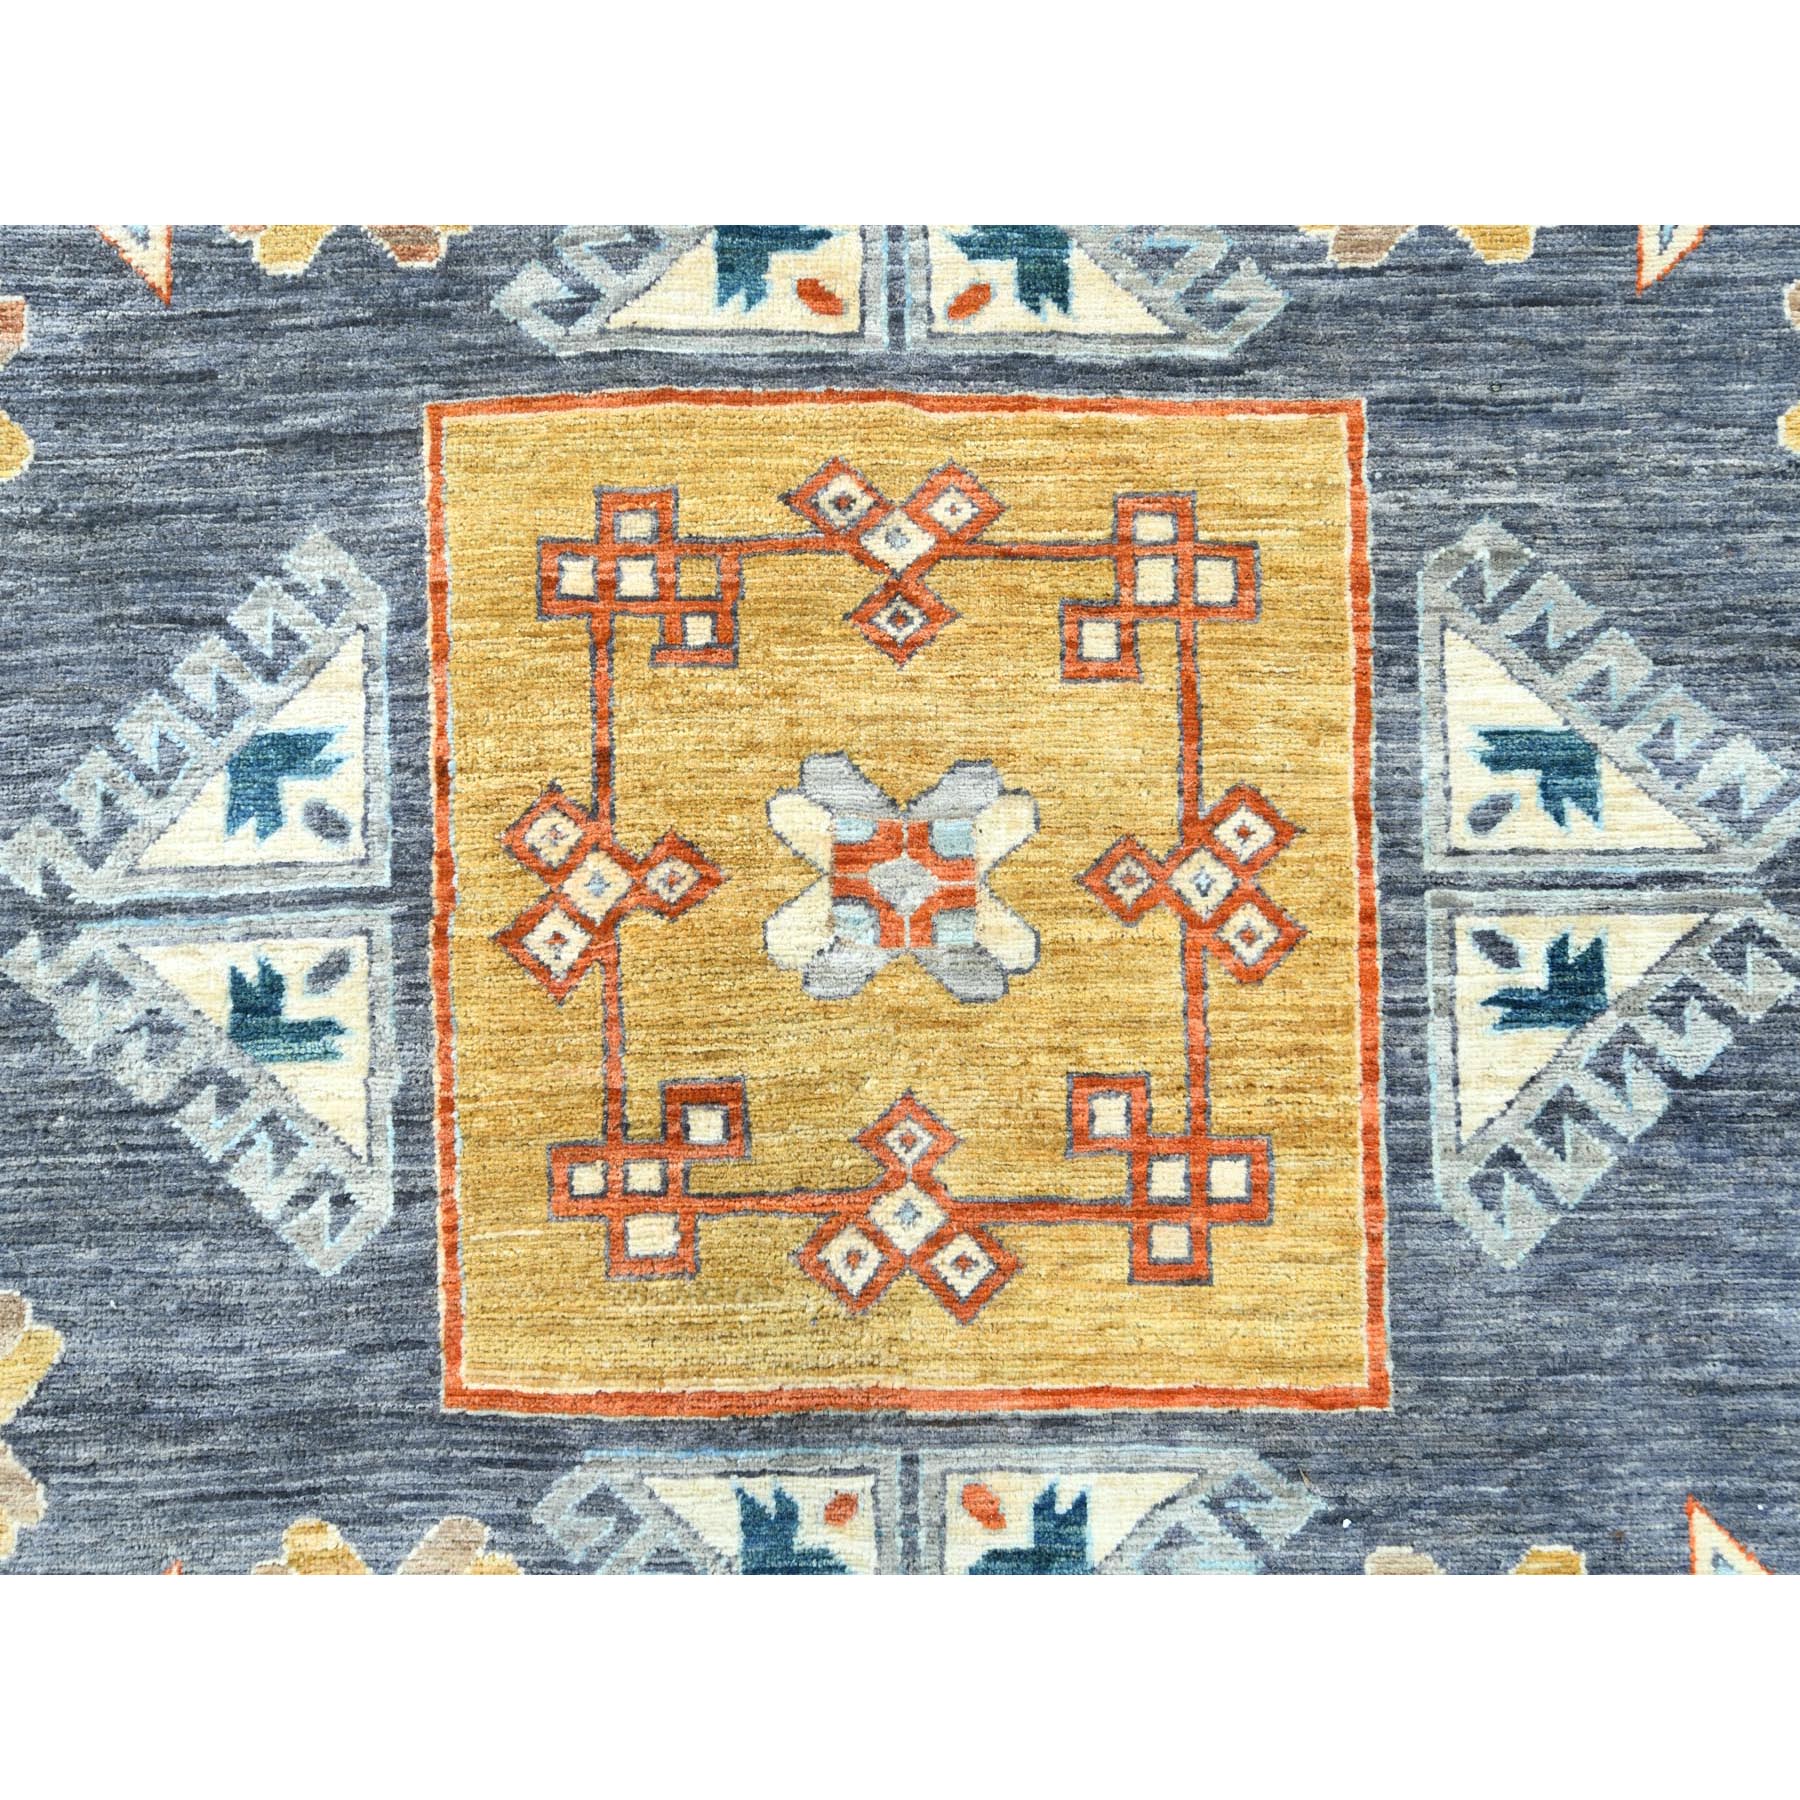 10'x13'7" Gray, Hand Woven Armenian Inspired Caucasian Design, 200 KPSI Natural Dyes, Densely Woven Soft Wool, Oriental Rug 